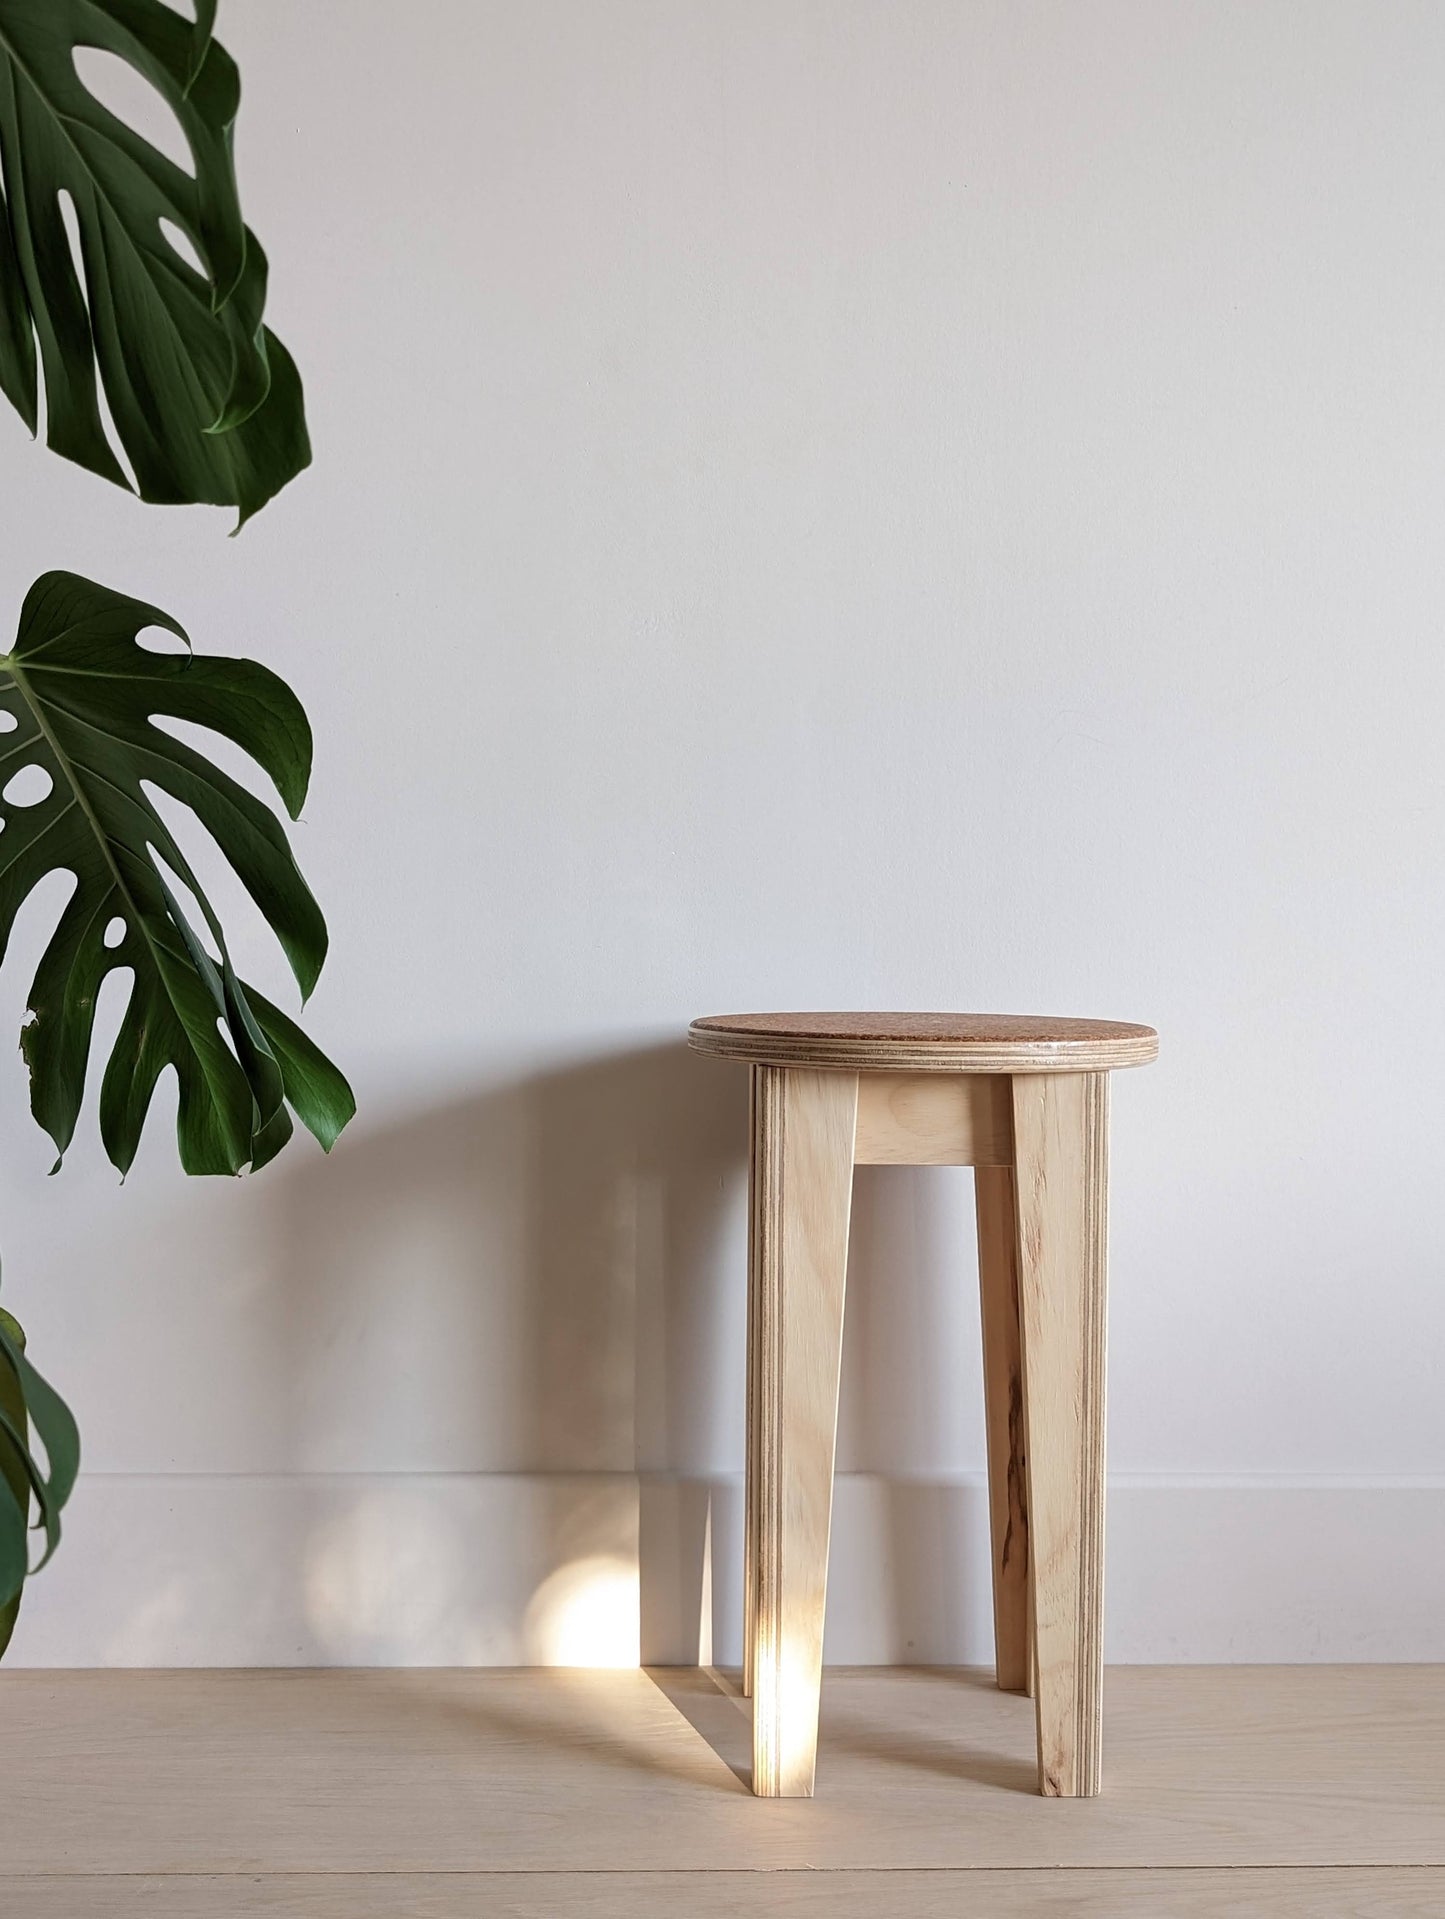 The stool in plywood